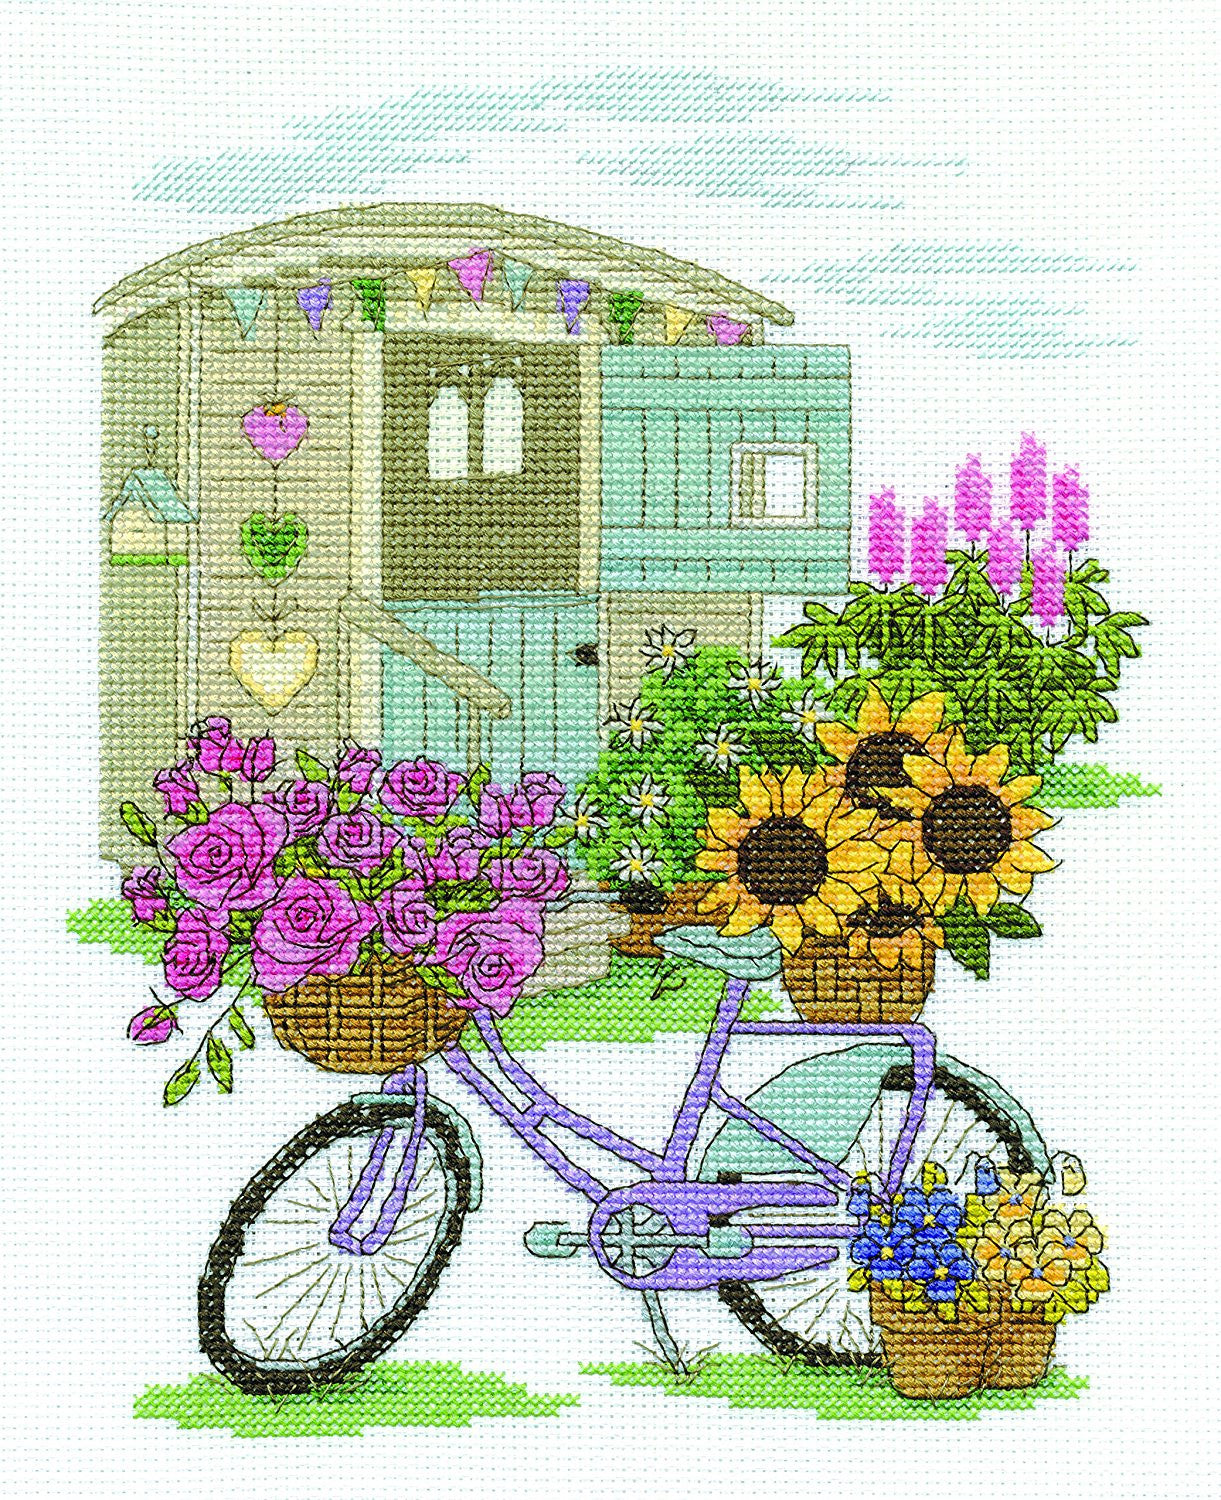 DMC "Flowery Bicycle" 14 Count Cross Stitch Kit, Pack of 1, Multi Colour - hanrattycraftsgifts.co.uk